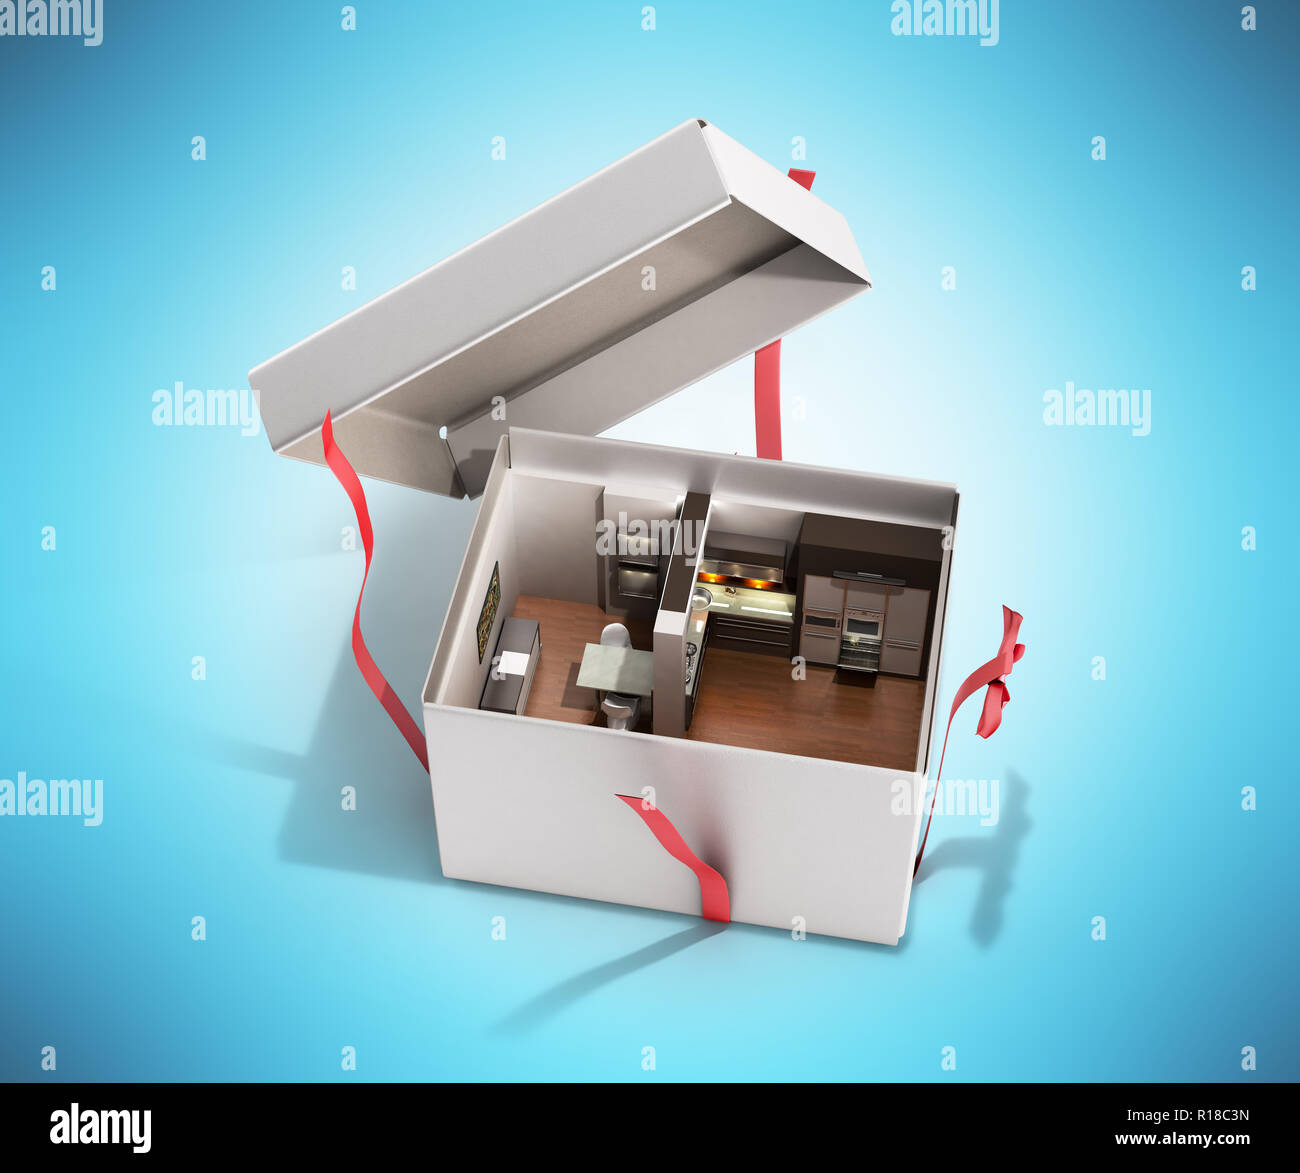 Concept apartment as a gift Kitchen interior in an open box 3d render on blue Stock Photo